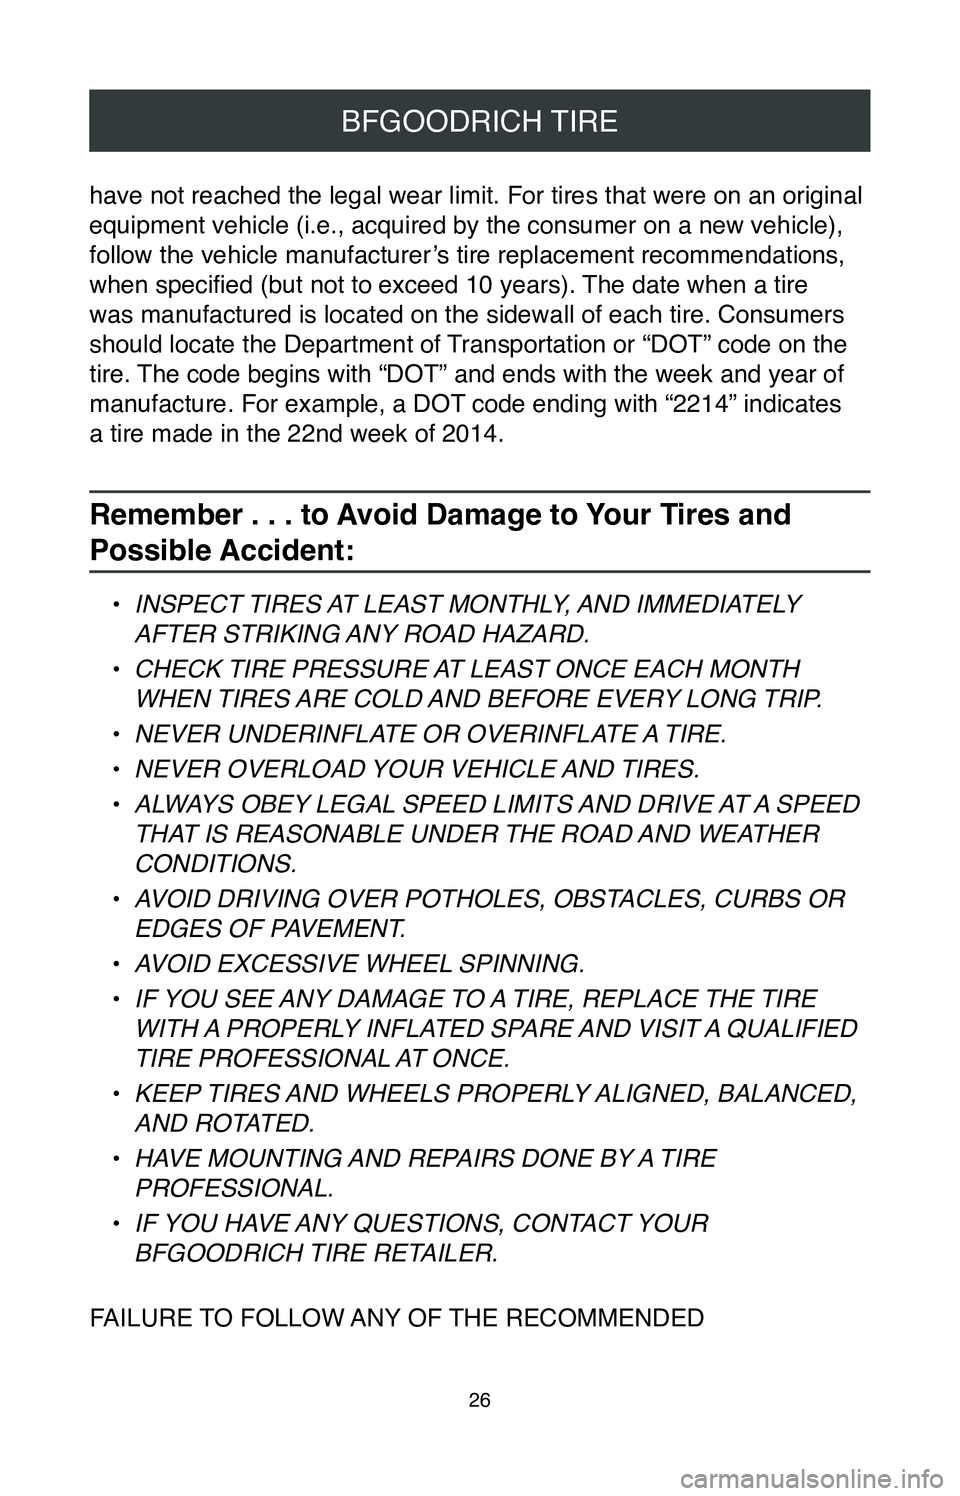 TOYOTA COROLLA HYBRID 2020  Warranties & Maintenance Guides (in English) 26
BFGOODRICH TIRE
have not reached the legal wear limit. For tires that were on an origina\
l 
equipment vehicle (i.e., acquired by the consumer on a new vehicle), 
follow the vehicle manufacturer’